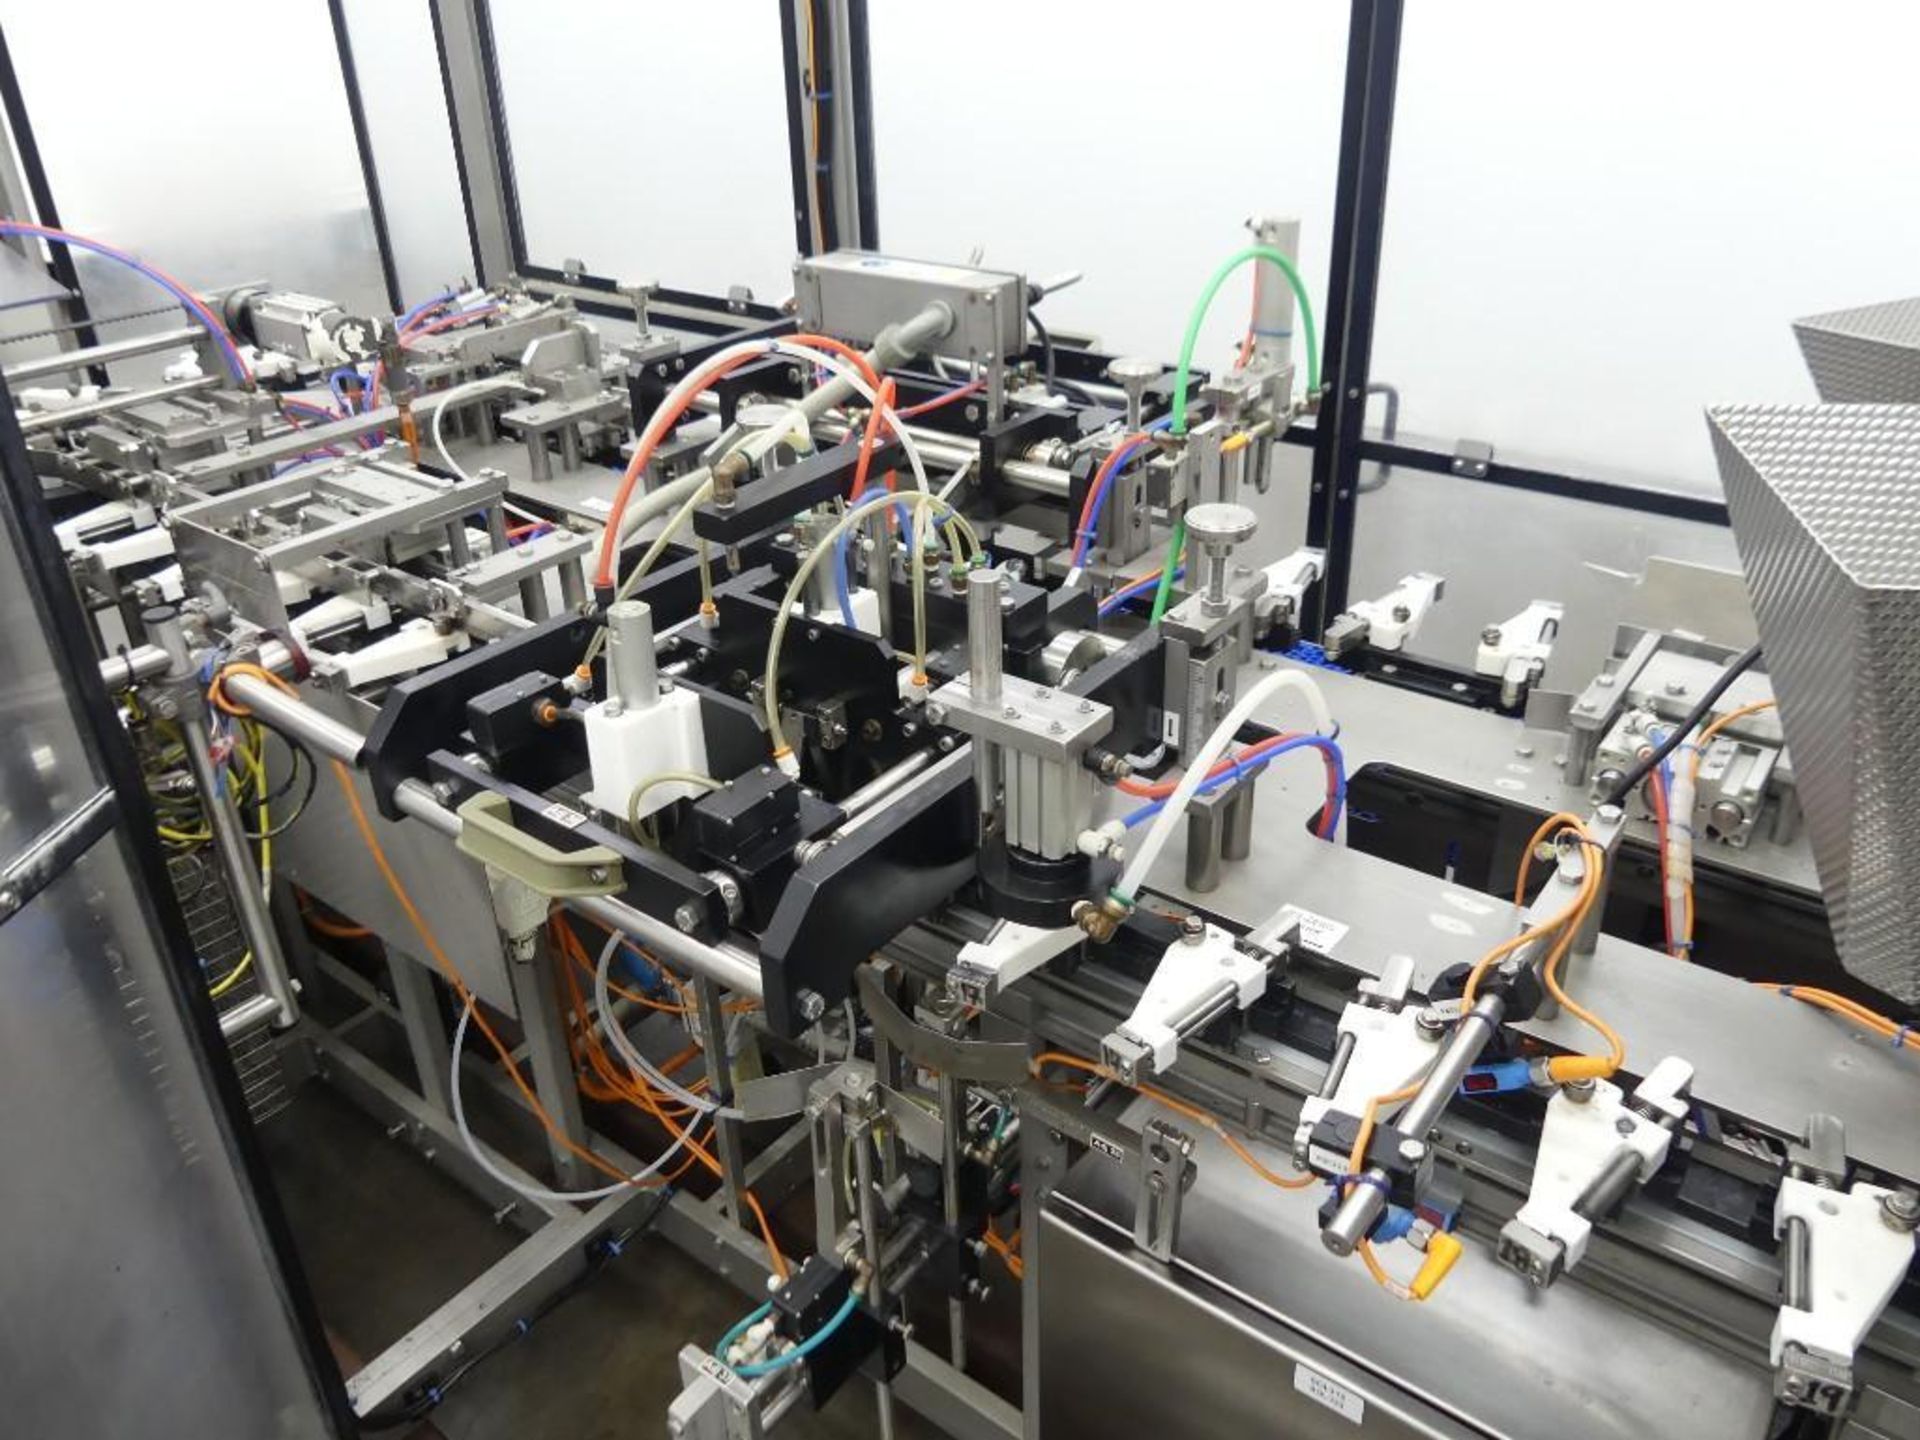 Massman HFFS-IM1000 Flexible Pouch Packaging System - Image 31 of 127